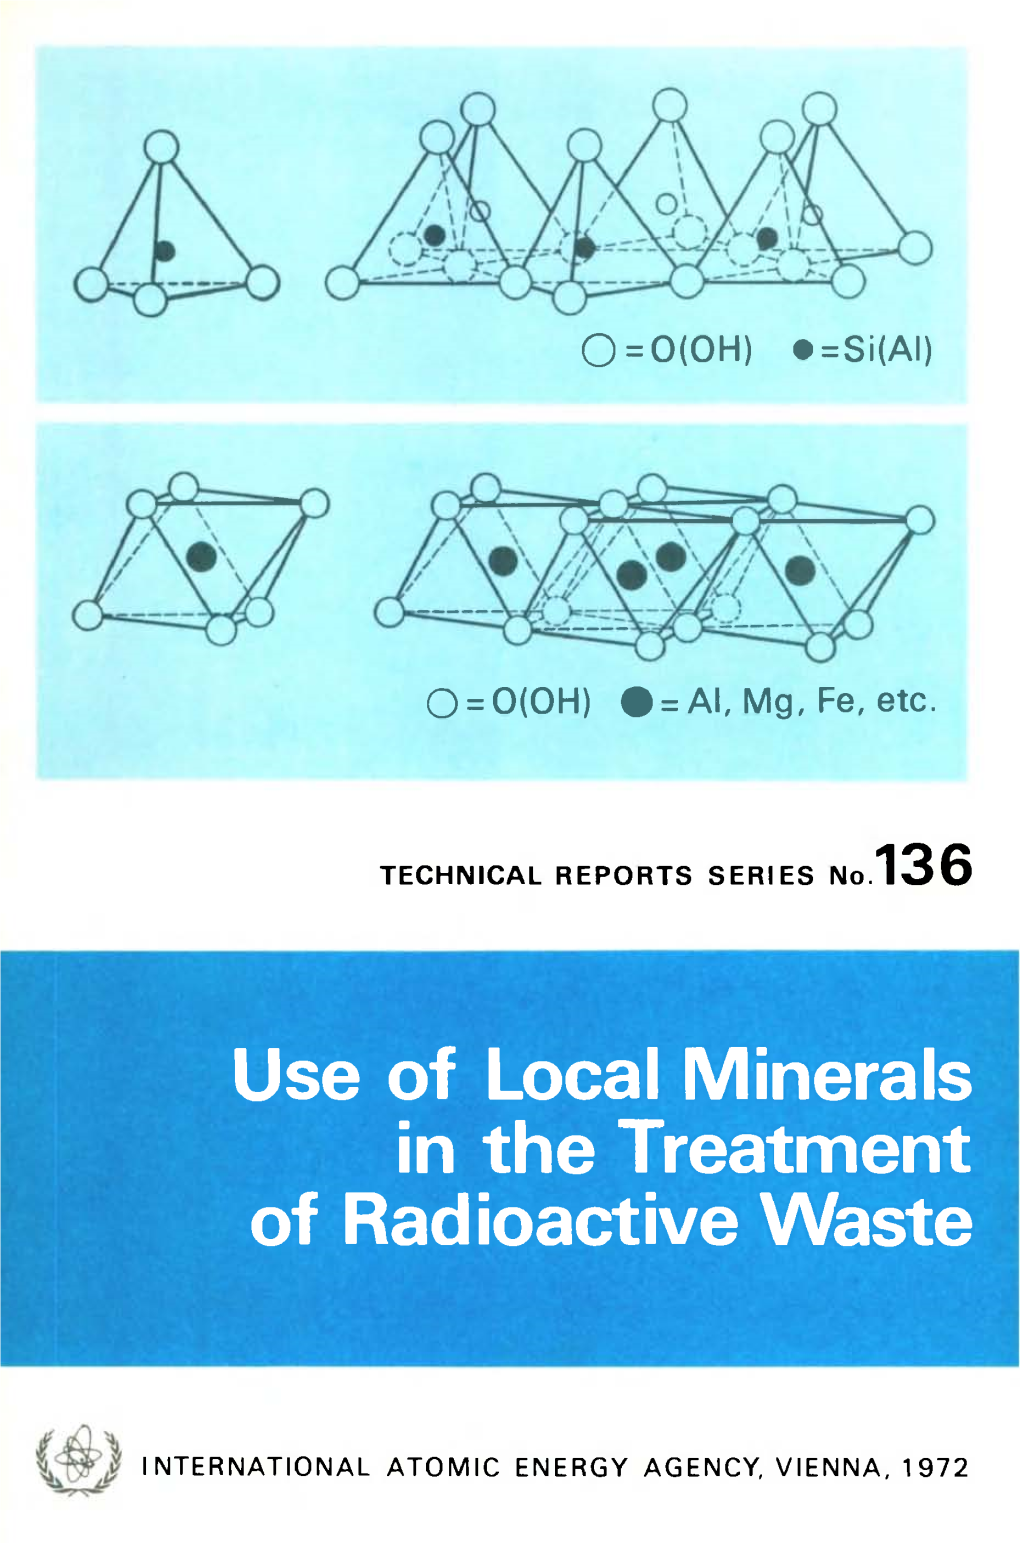 Use of Local Minerals in the Treatment of Radioactive Waste